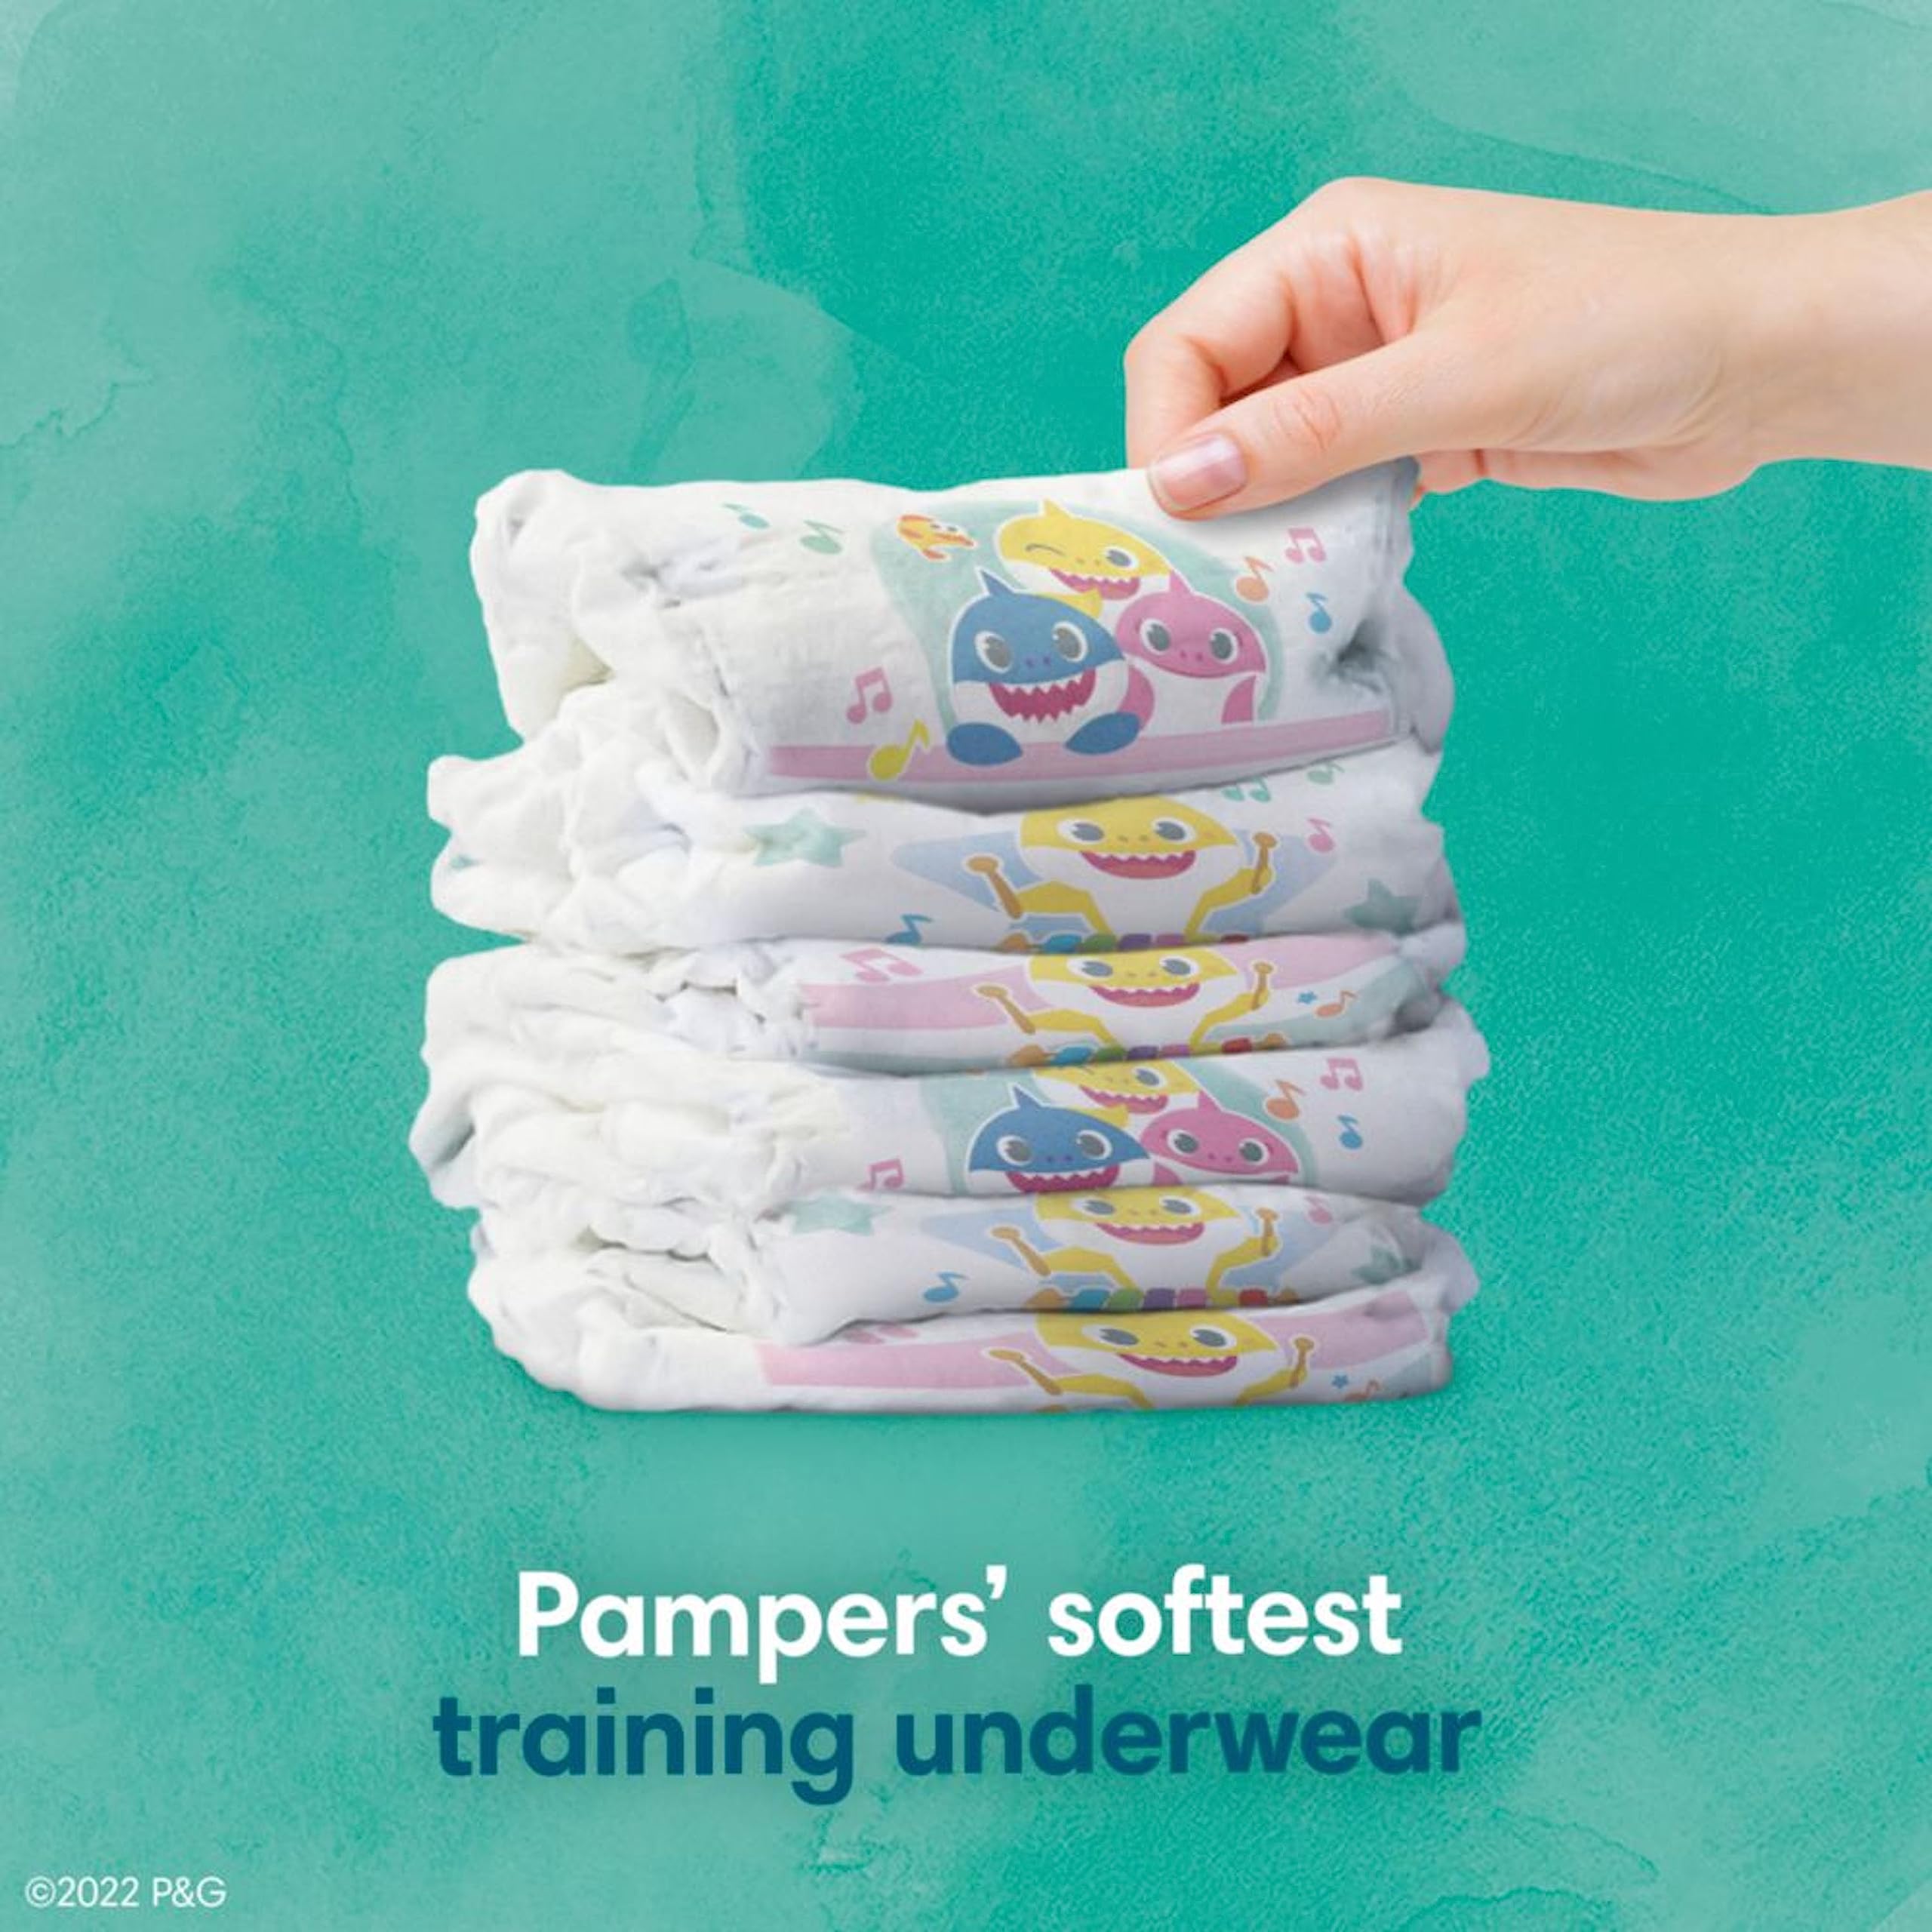 Pampers Pure Protection Training Underwear, Baby Shark, 3T-4T, 58 Count